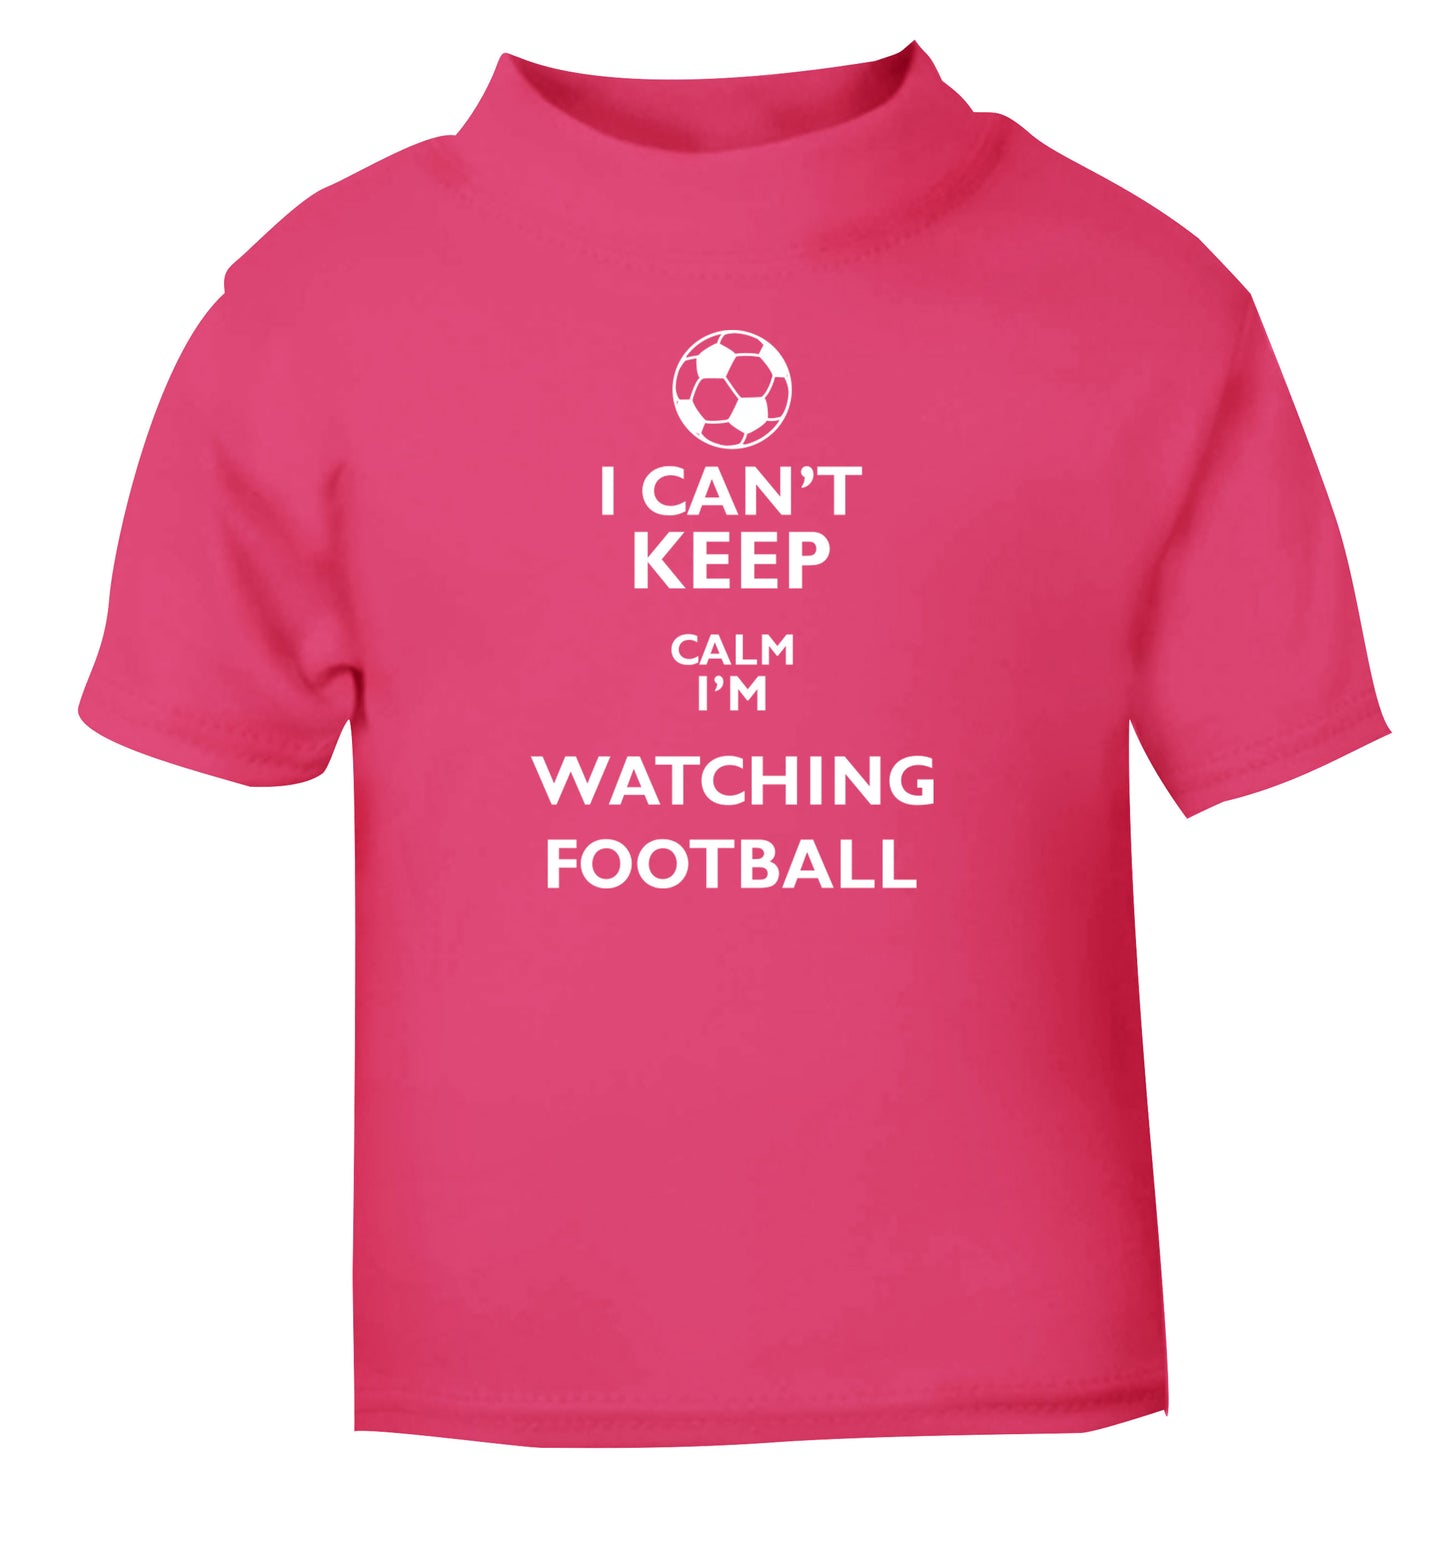 I can't keep calm I'm watching the football pink Baby Toddler Tshirt 2 Years